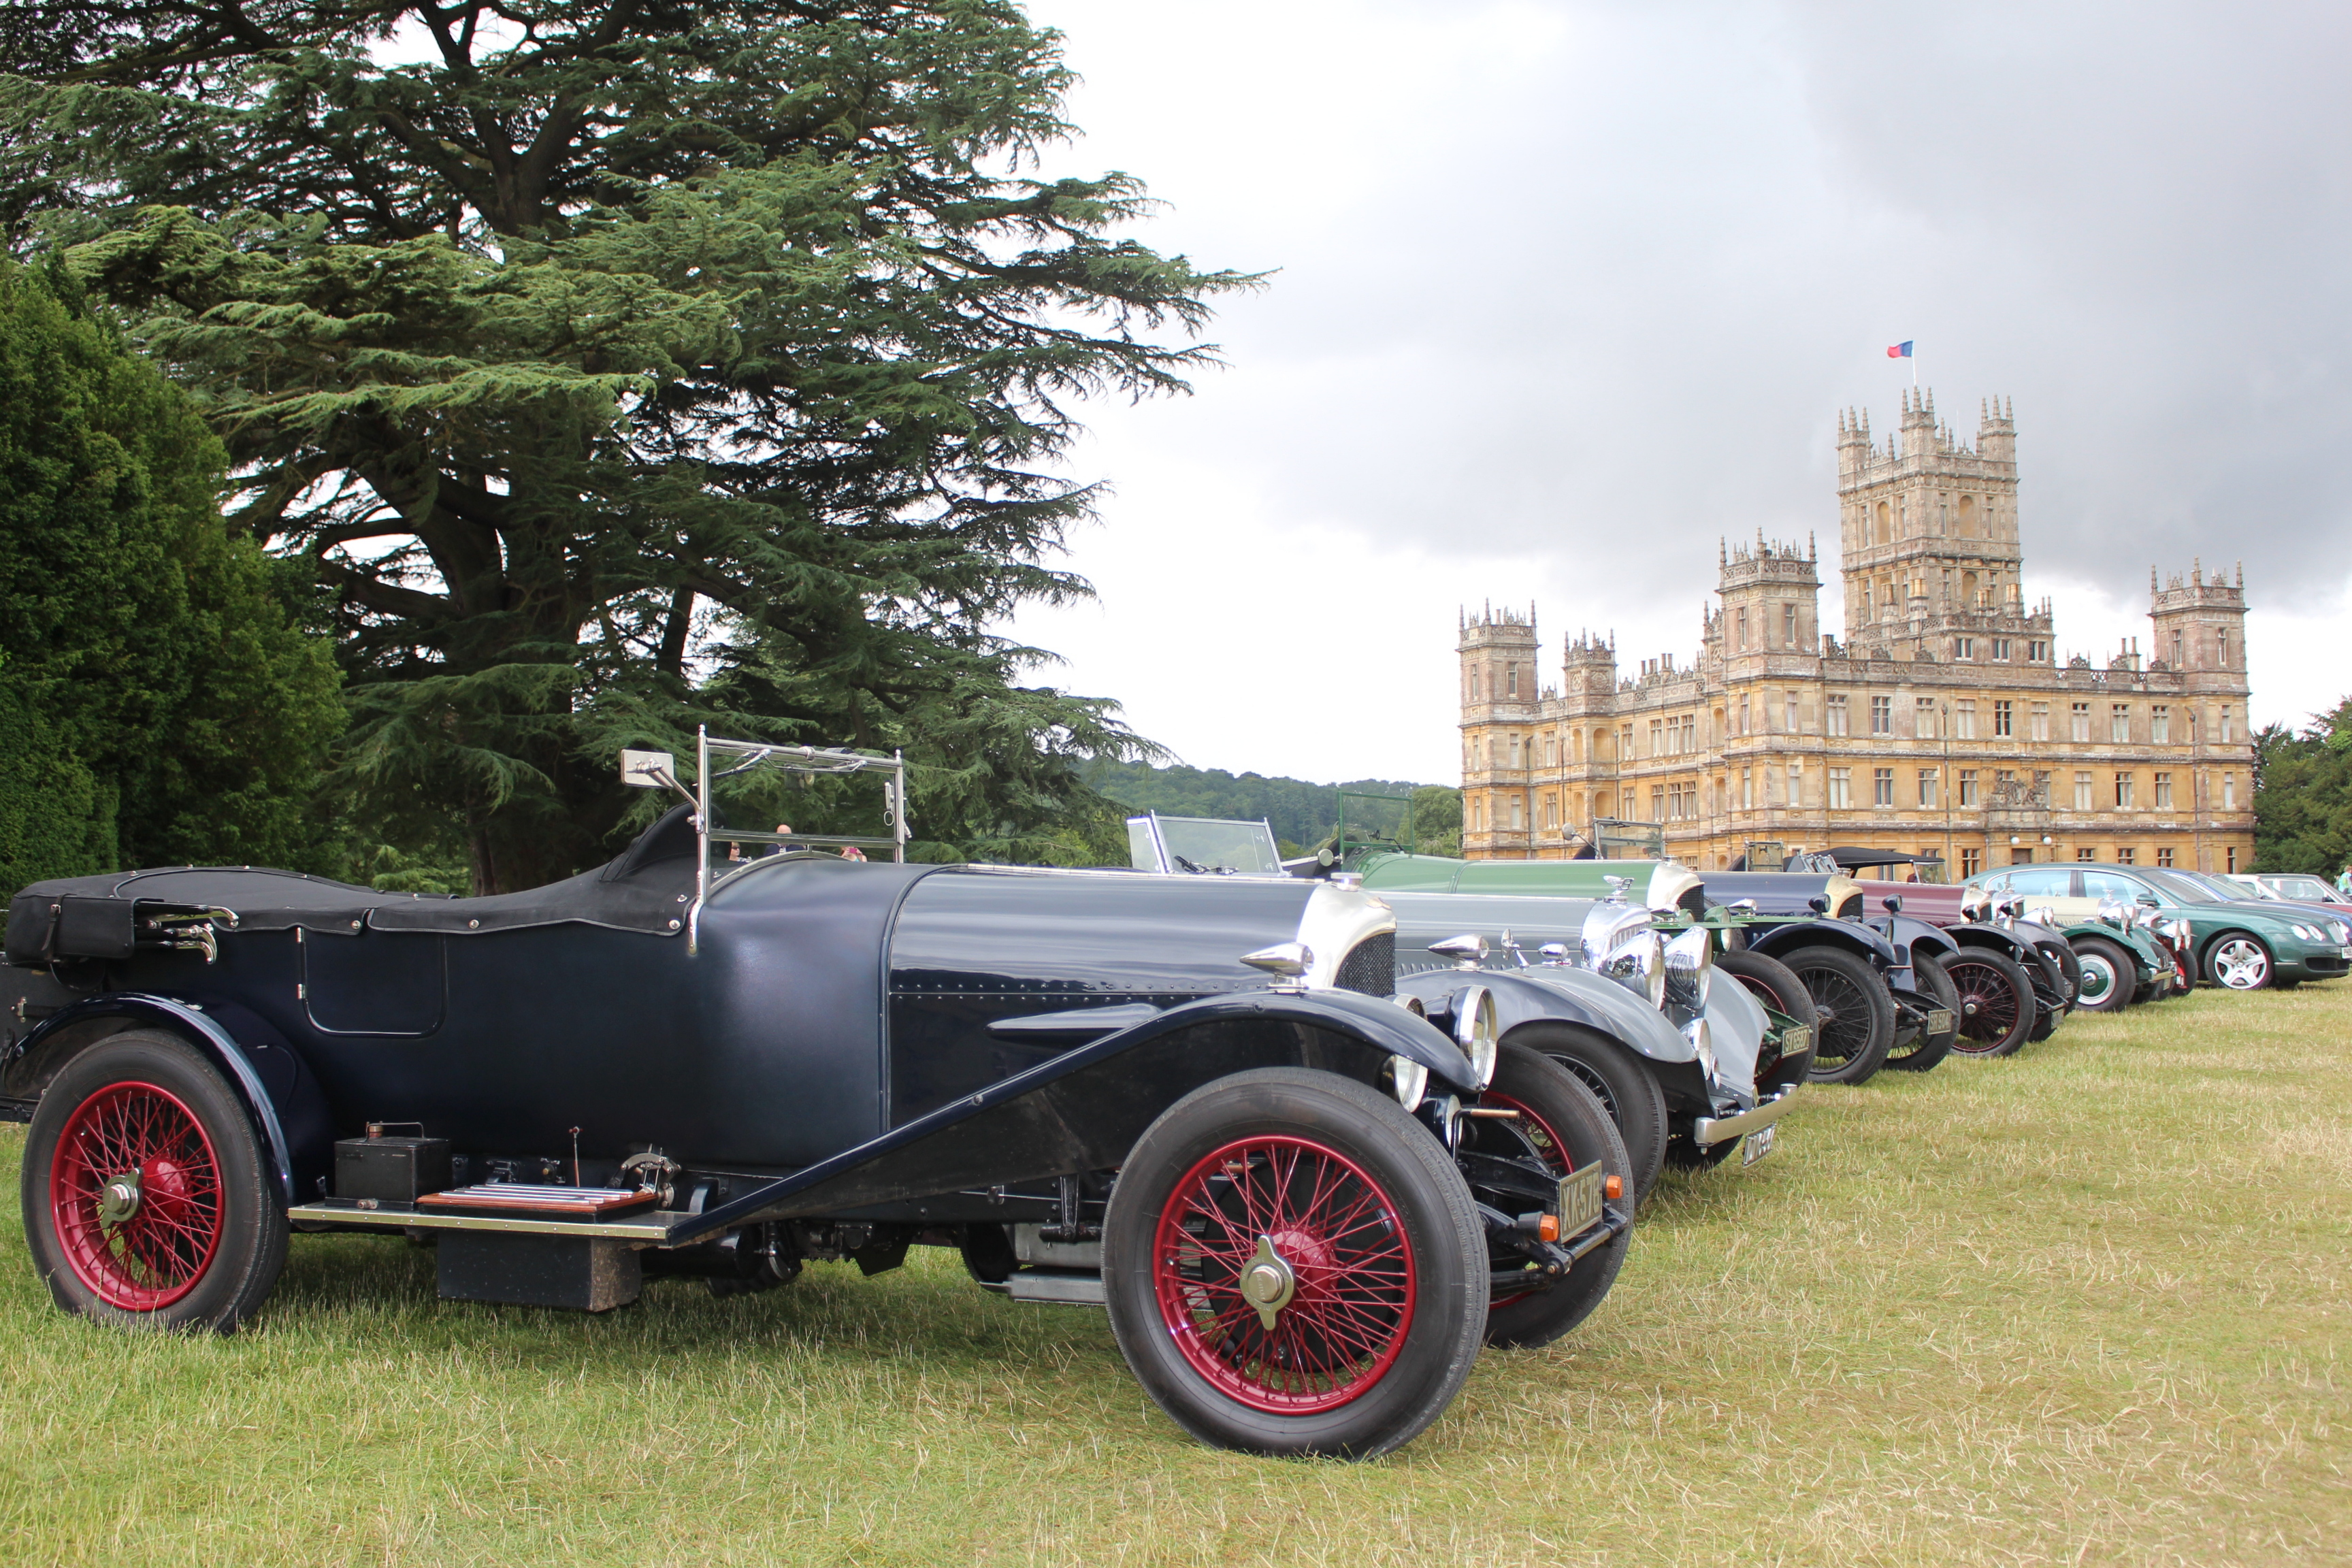 Filming location of Downton Abbey, Highclere Castle